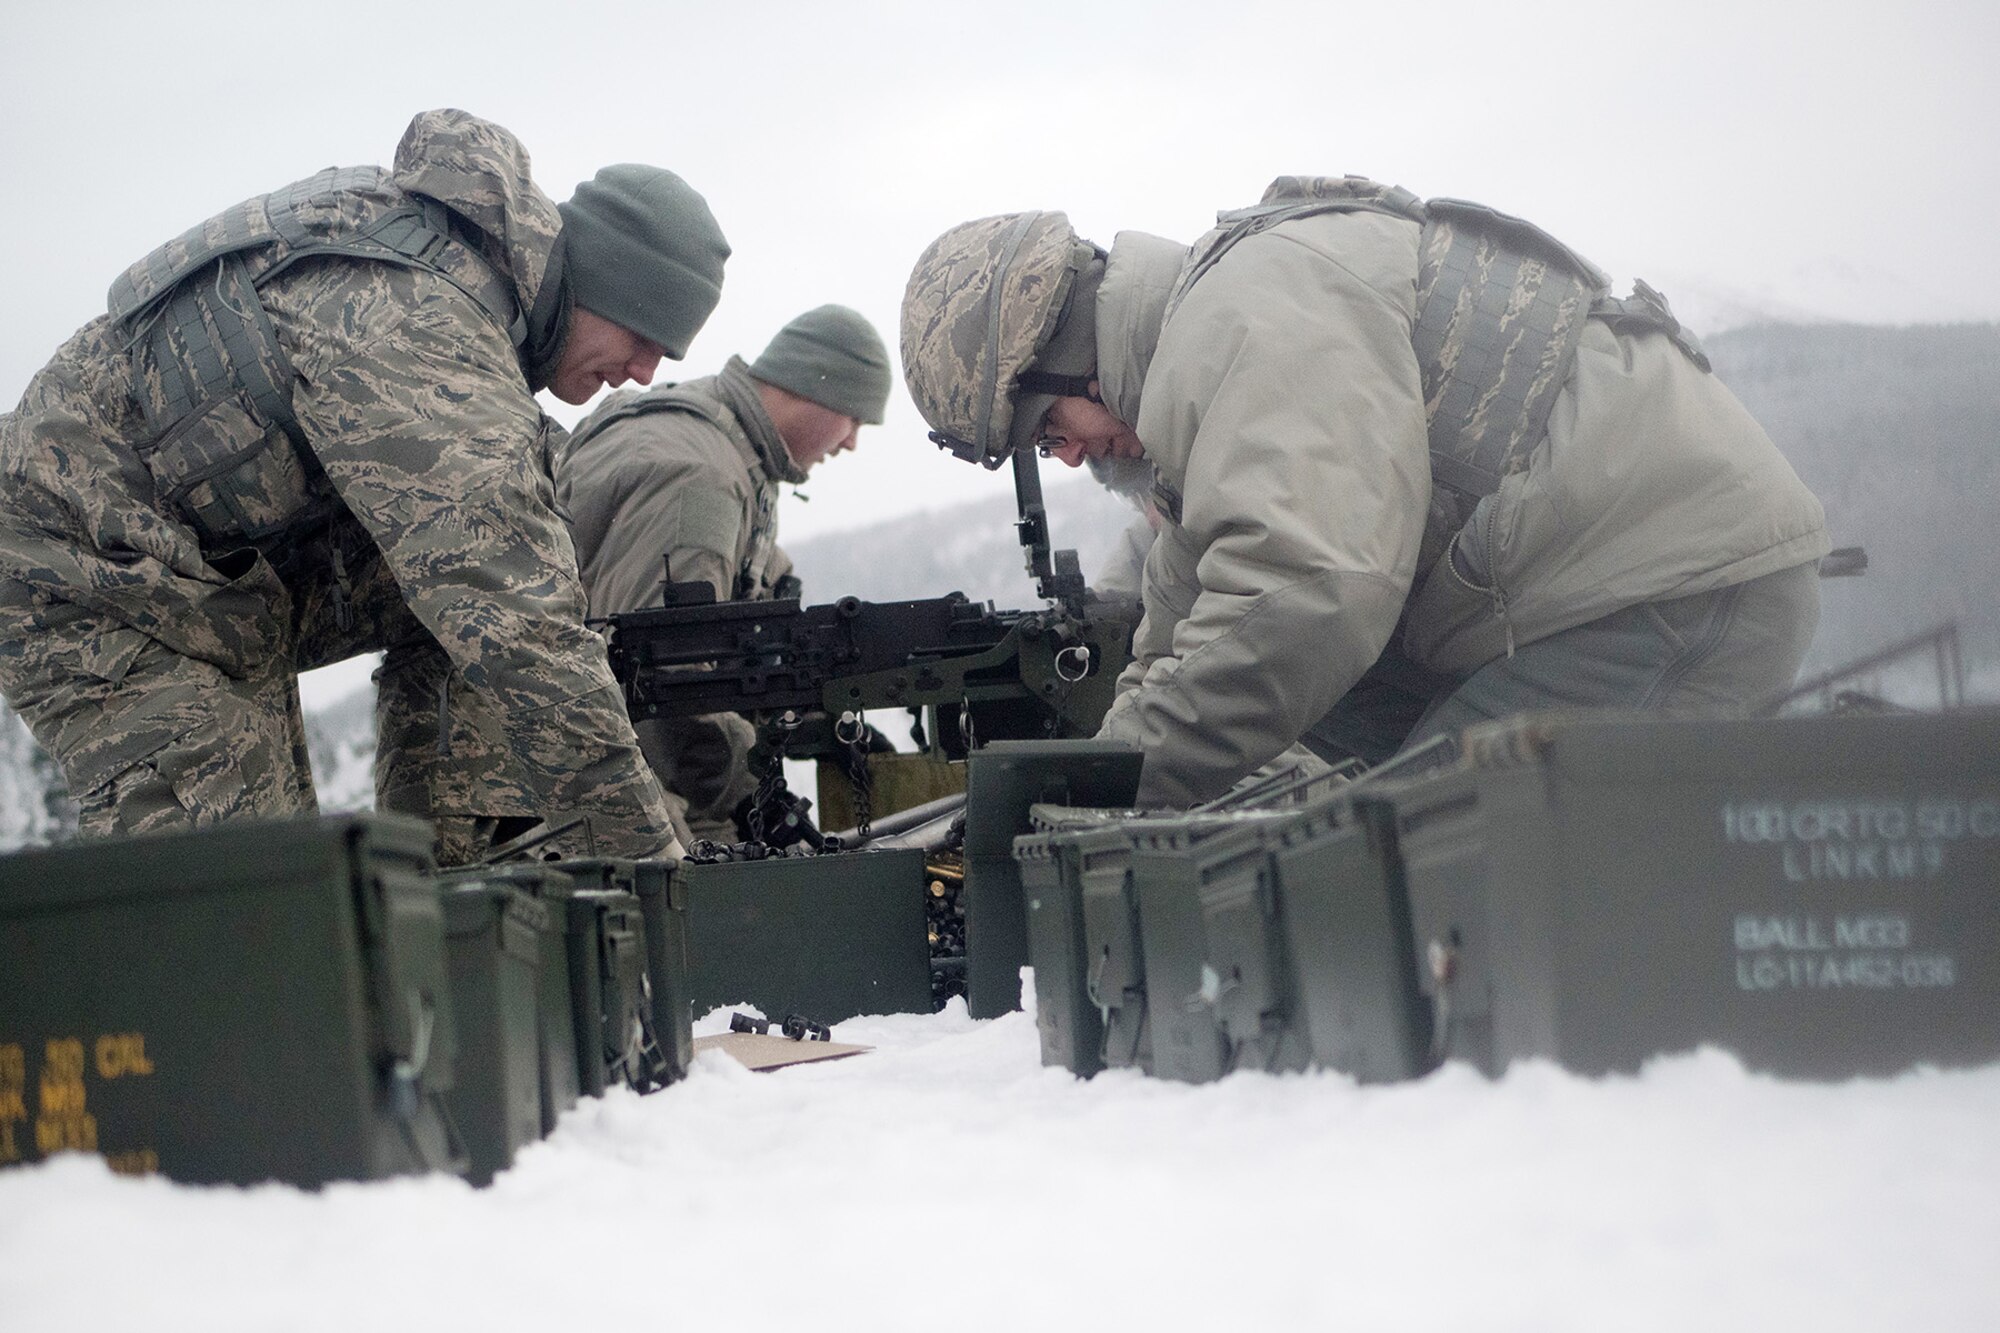 Airmen assigned to the 673d Security Forces Squadron pick up expended casings after conducting a machine gun qualification range on Joint Base Elmendorf-Richardson, Alaska, Jan. 10, 2018. Security Forces Airmen perform extensive training in law enforcement as well as combat tactics to protect U.S. Military bases and assets both stateside and overseas.